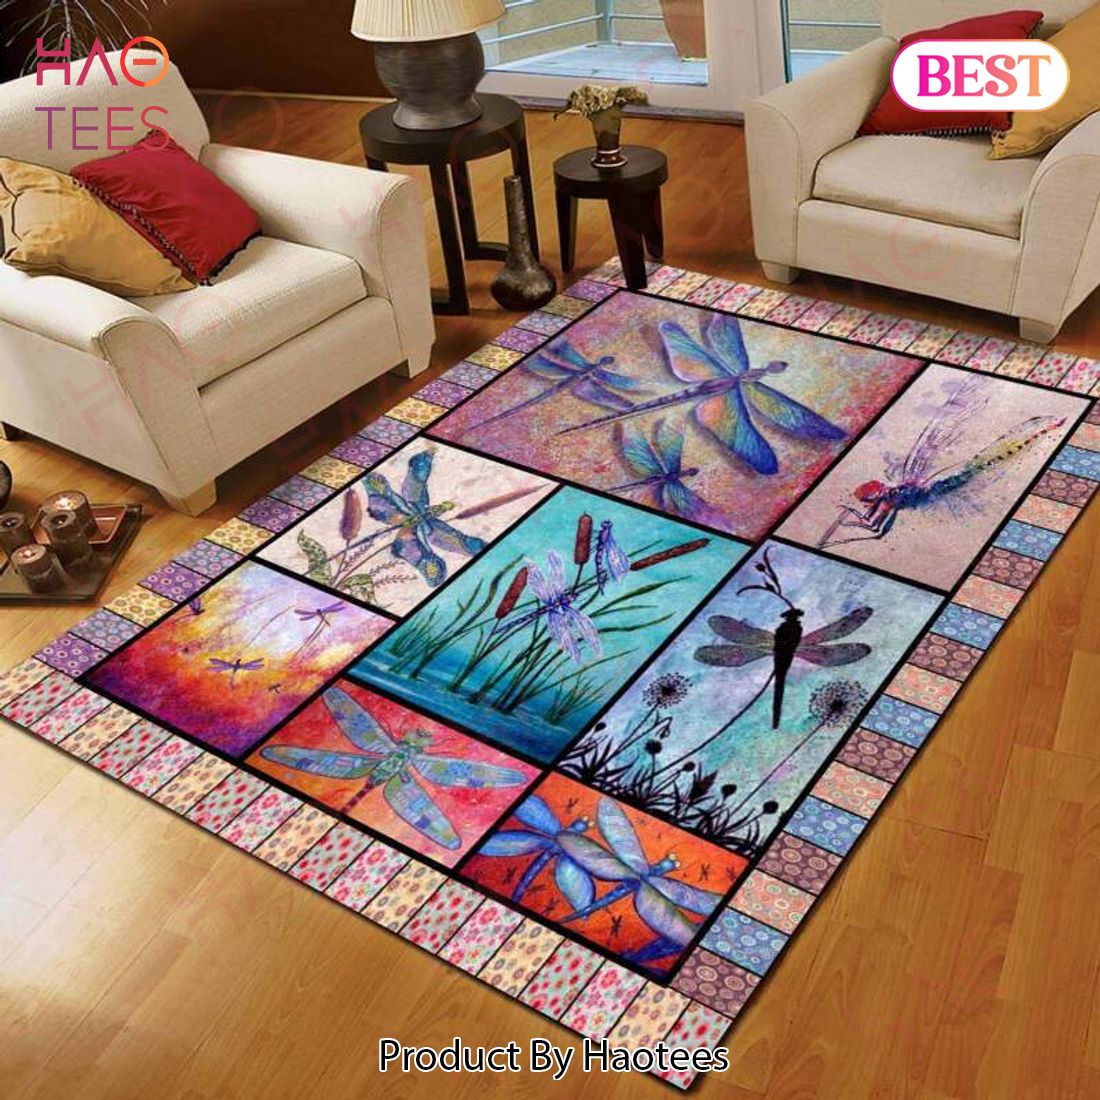 Dragonfly Limited Edition Area Rugs Carpet Mat Kitchen Rugs Floor Decor - KS31